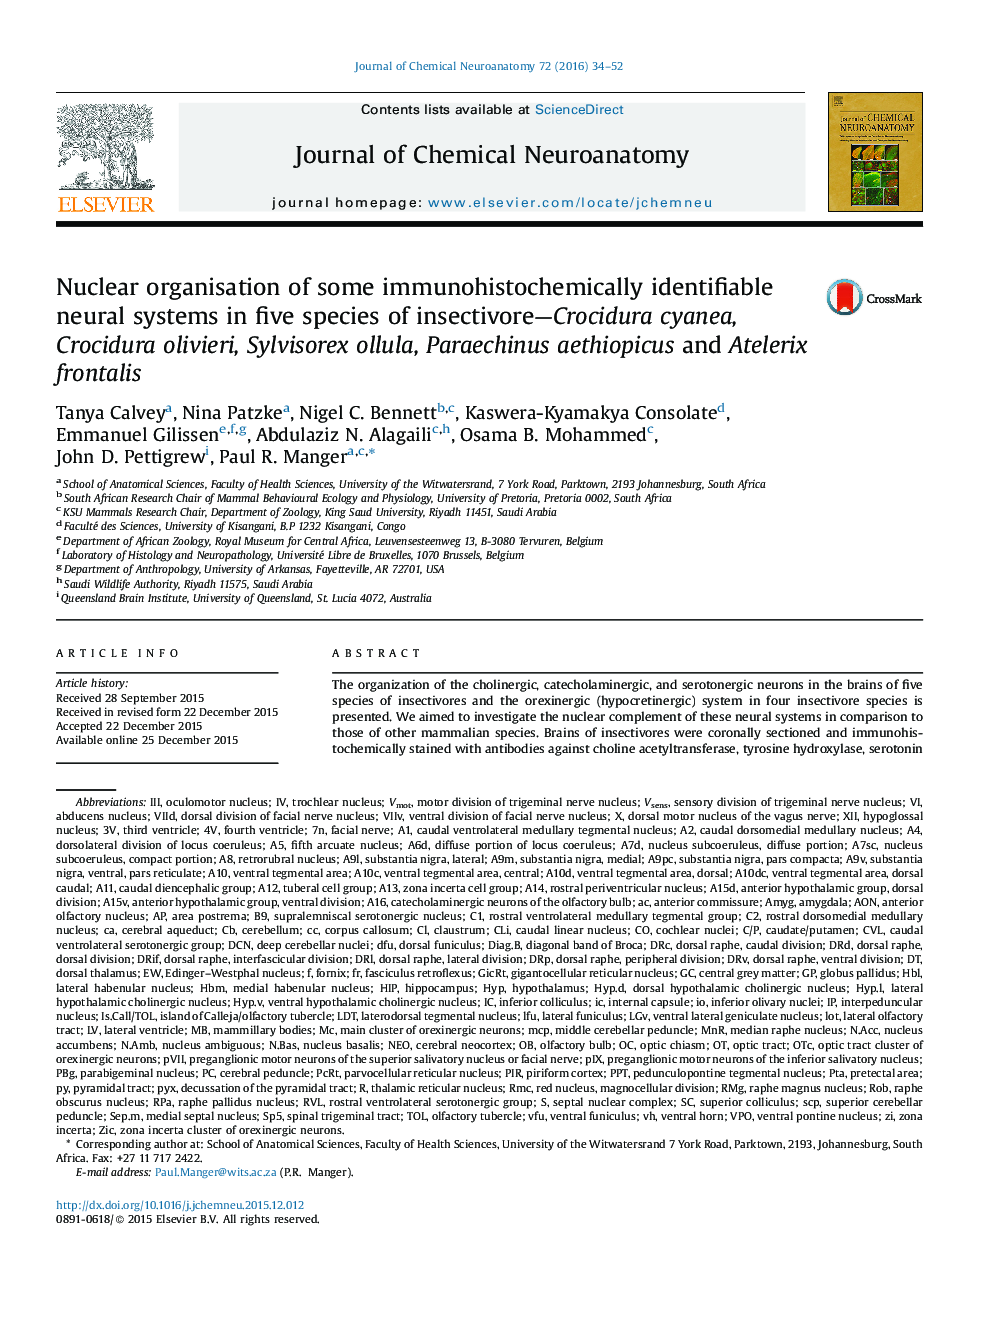 Nuclear organisation of some immunohistochemically identifiable neural systems in five species of insectivore-Crocidura cyanea, Crocidura olivieri, Sylvisorex ollula, Paraechinus aethiopicus and Atelerix frontalis